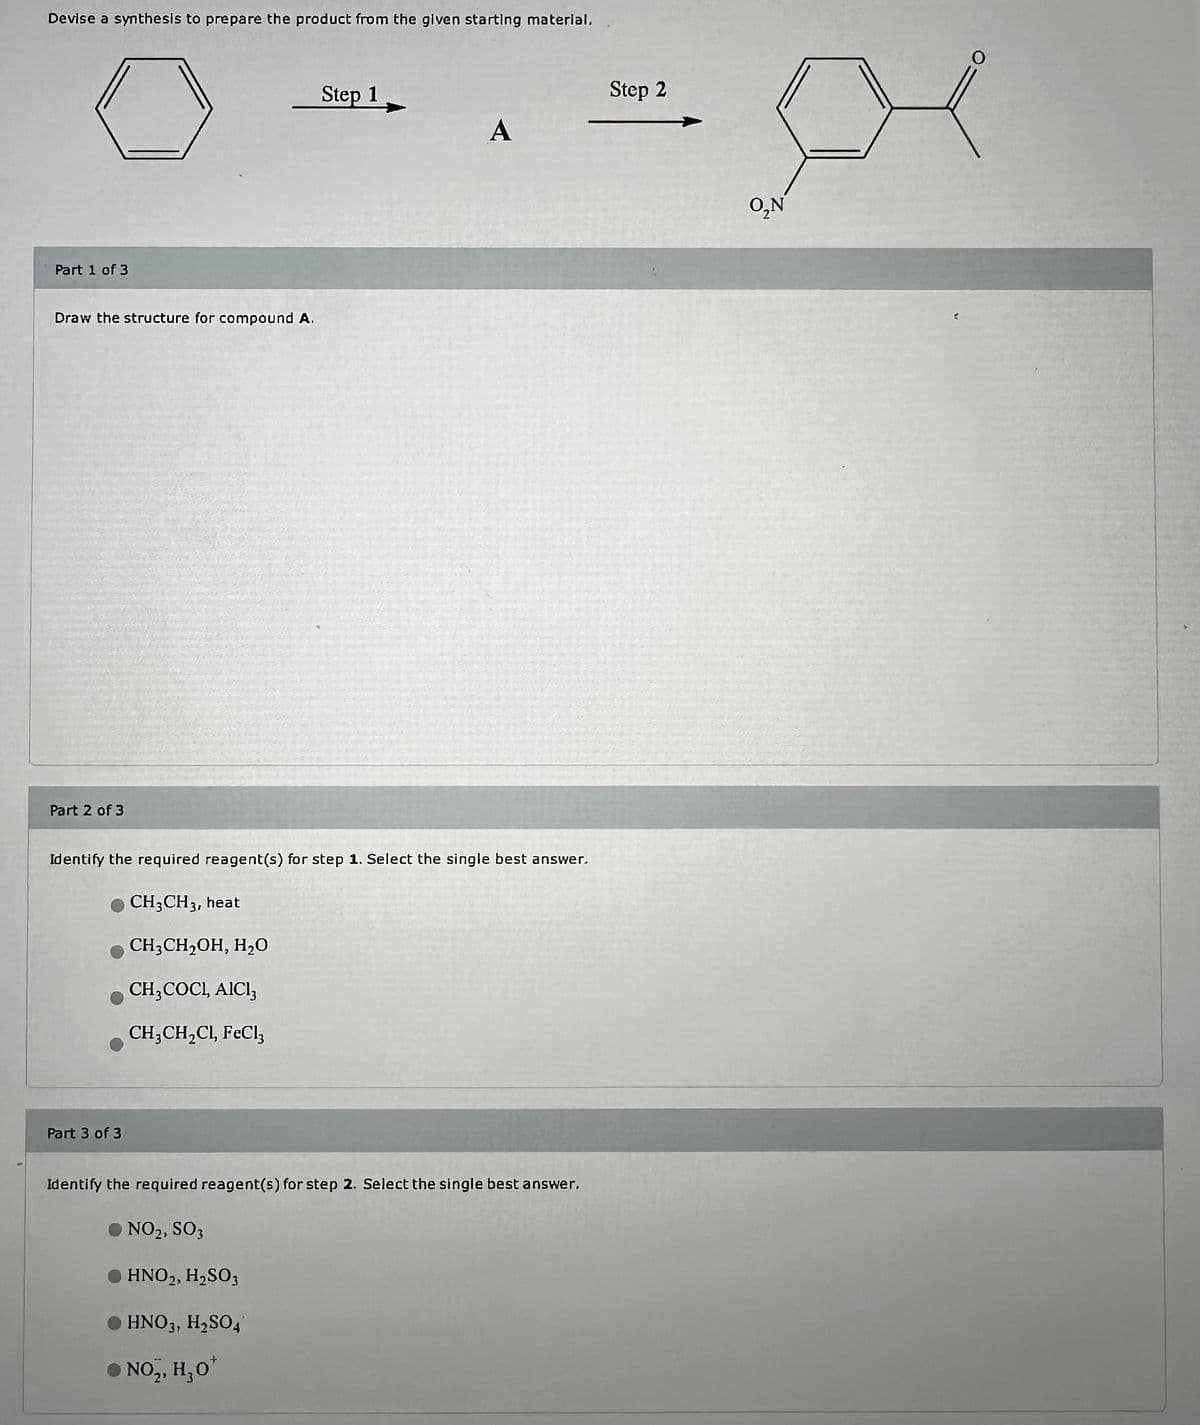 Devise a synthesis to prepare the product from the given starting material.
Part 1 of 3
Draw the structure for compound A.
Part 2 of 3
Step 1
Step 2
A
Identify the required reagent(s) for step 1. Select the single best answer.
CH3CH 3, heat
CH3CH2OH, H₂O
CH3COCL, AICI₁
CH3CH2Cl, FeCl3
Part 3 of 3
Identify the required reagent(s) for step 2. Select the single best answer.
● NO2, SO3
●HNO2, H2SO3
● HNO 3, H₂SO4
●
NO2, H₂O
+
O,N